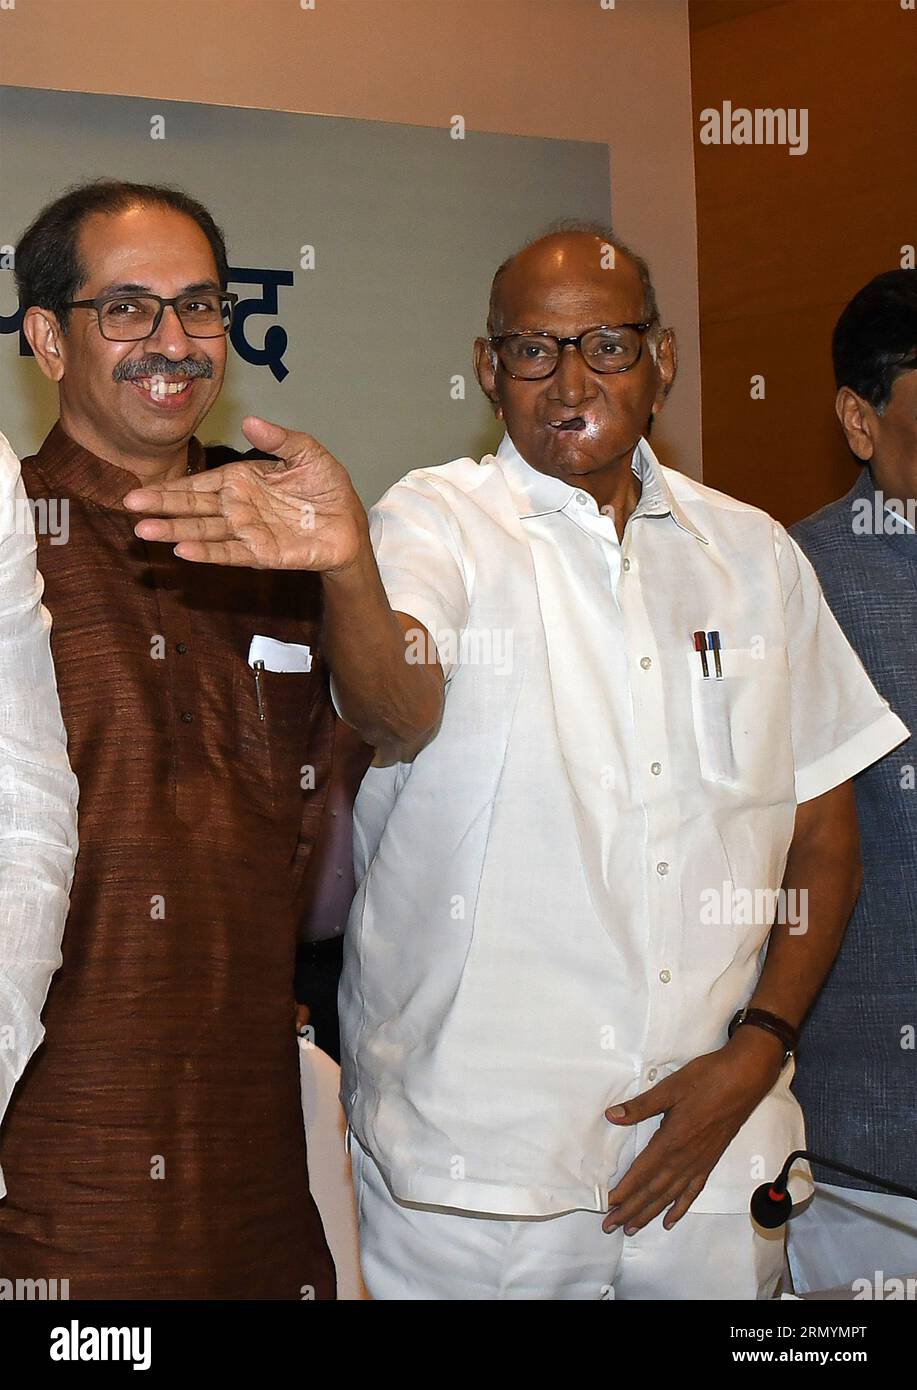 Mumbai, India. 30th Aug, 2023. L-R Shiv Sena (UBT) chief Uddhav Thackeray pose for a photo with Nationalist Congress Party (NCP) chief Sharad Govindrao Pawar after the Maha Vikas Aghadi (MVA) press conference in Mumbai. The press conference was held ahead of Indian National Developmental Inclusive Alliance (INDIA) third meeting to be held on 31st August and 1st September 2023. (Photo by Ashish Vaishnav/SOPA Images/Sipa USA) Credit: Sipa USA/Alamy Live News Stock Photo